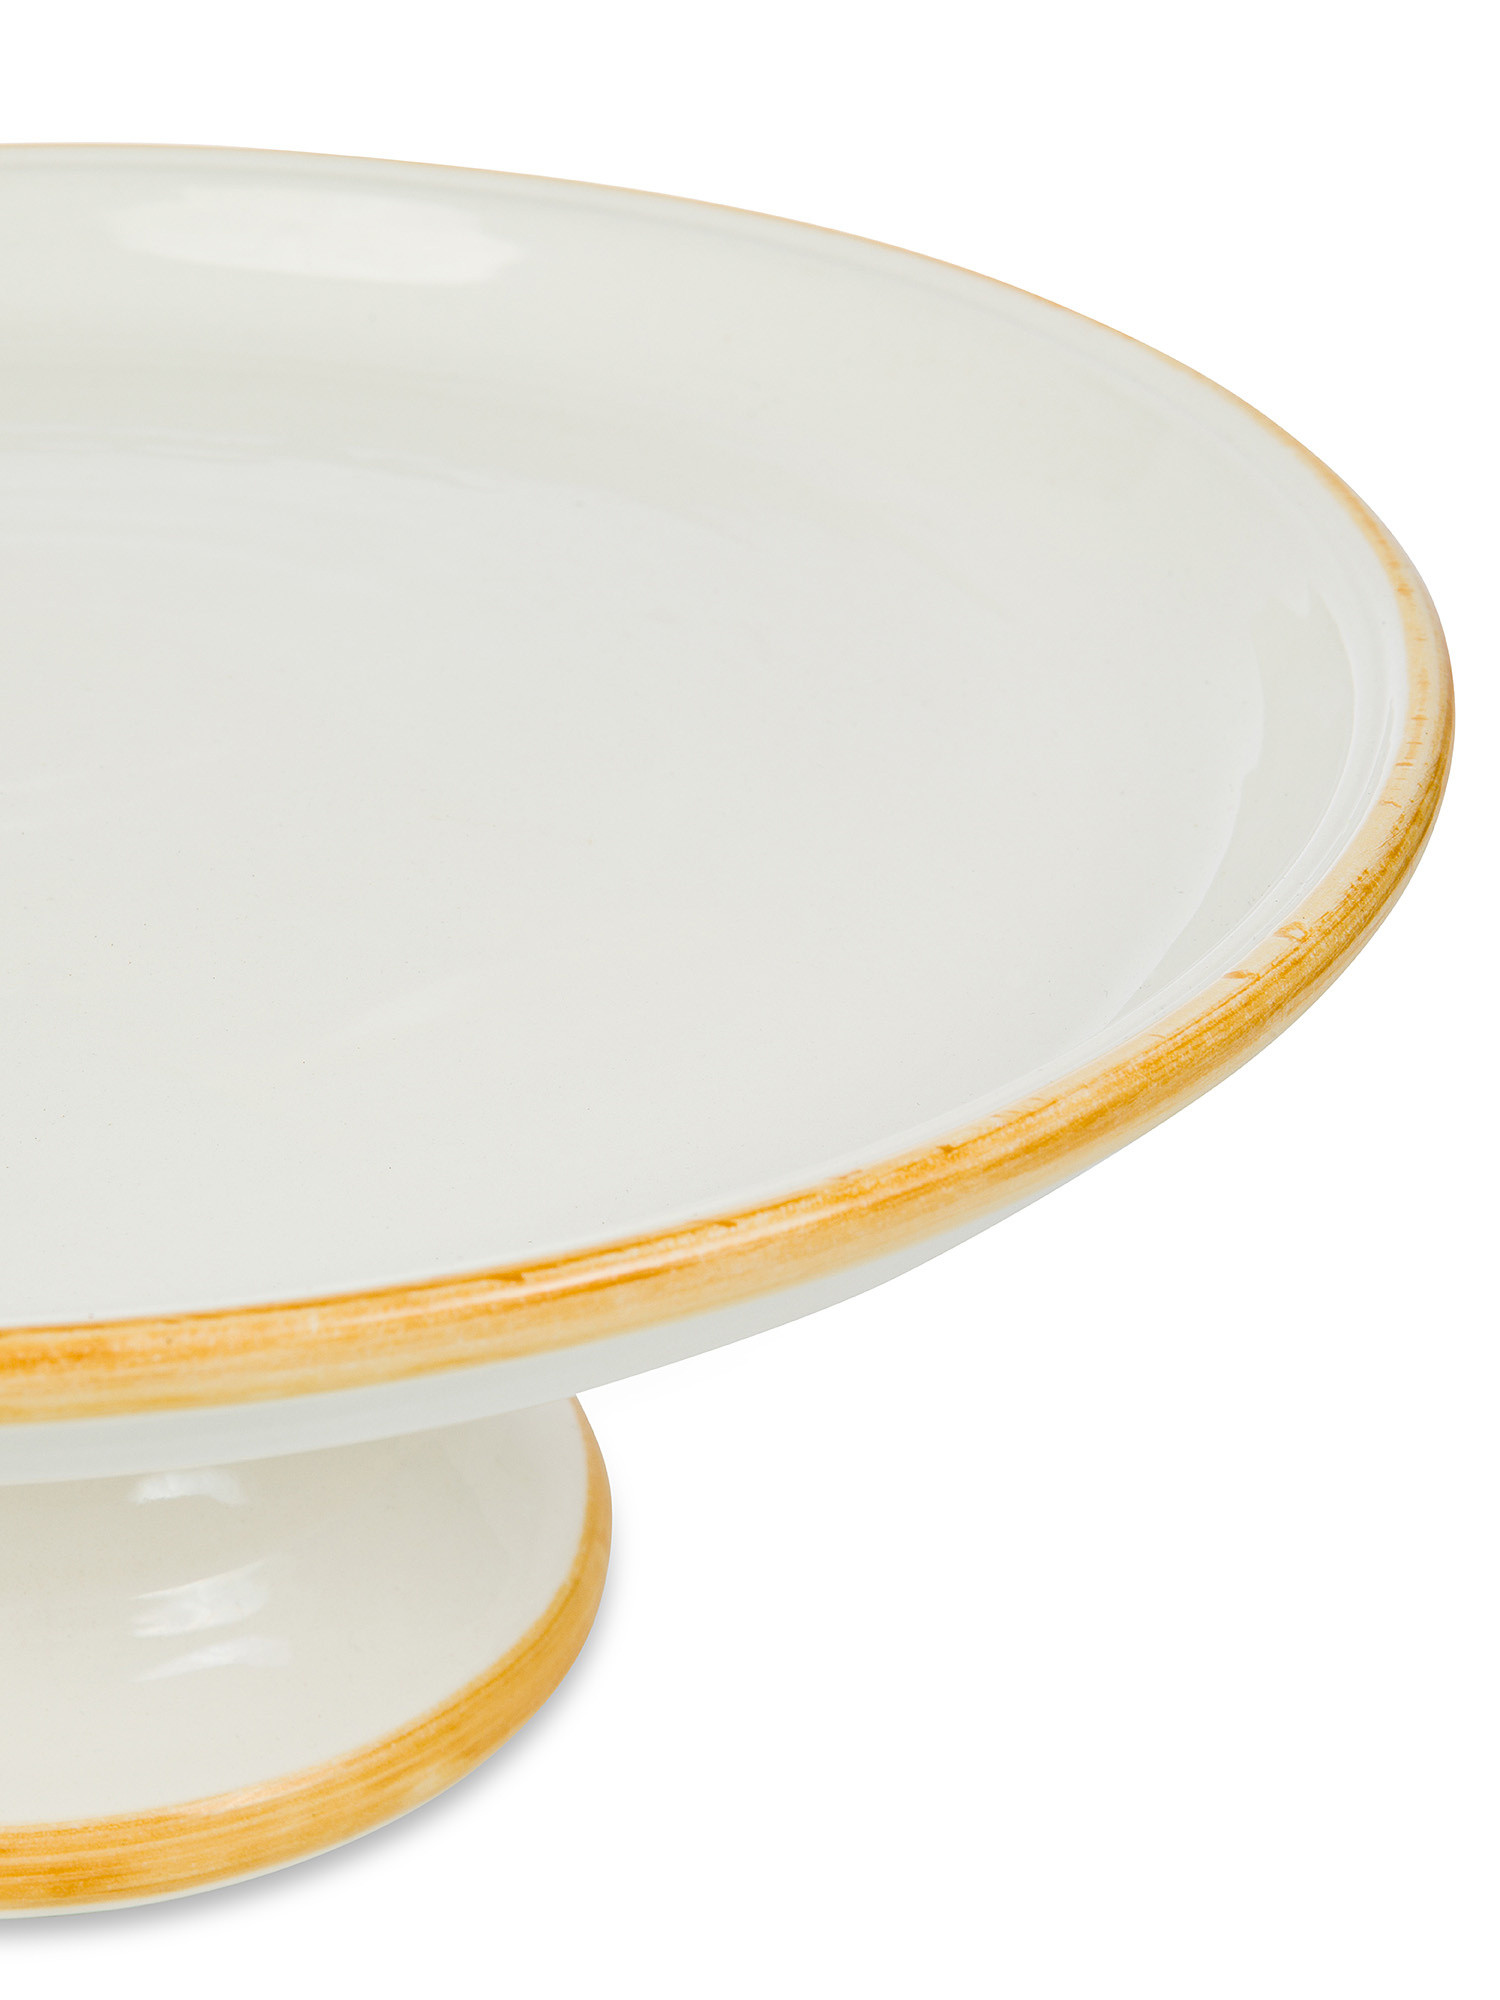 Ceramic cake stand with colored edge, White, large image number 1